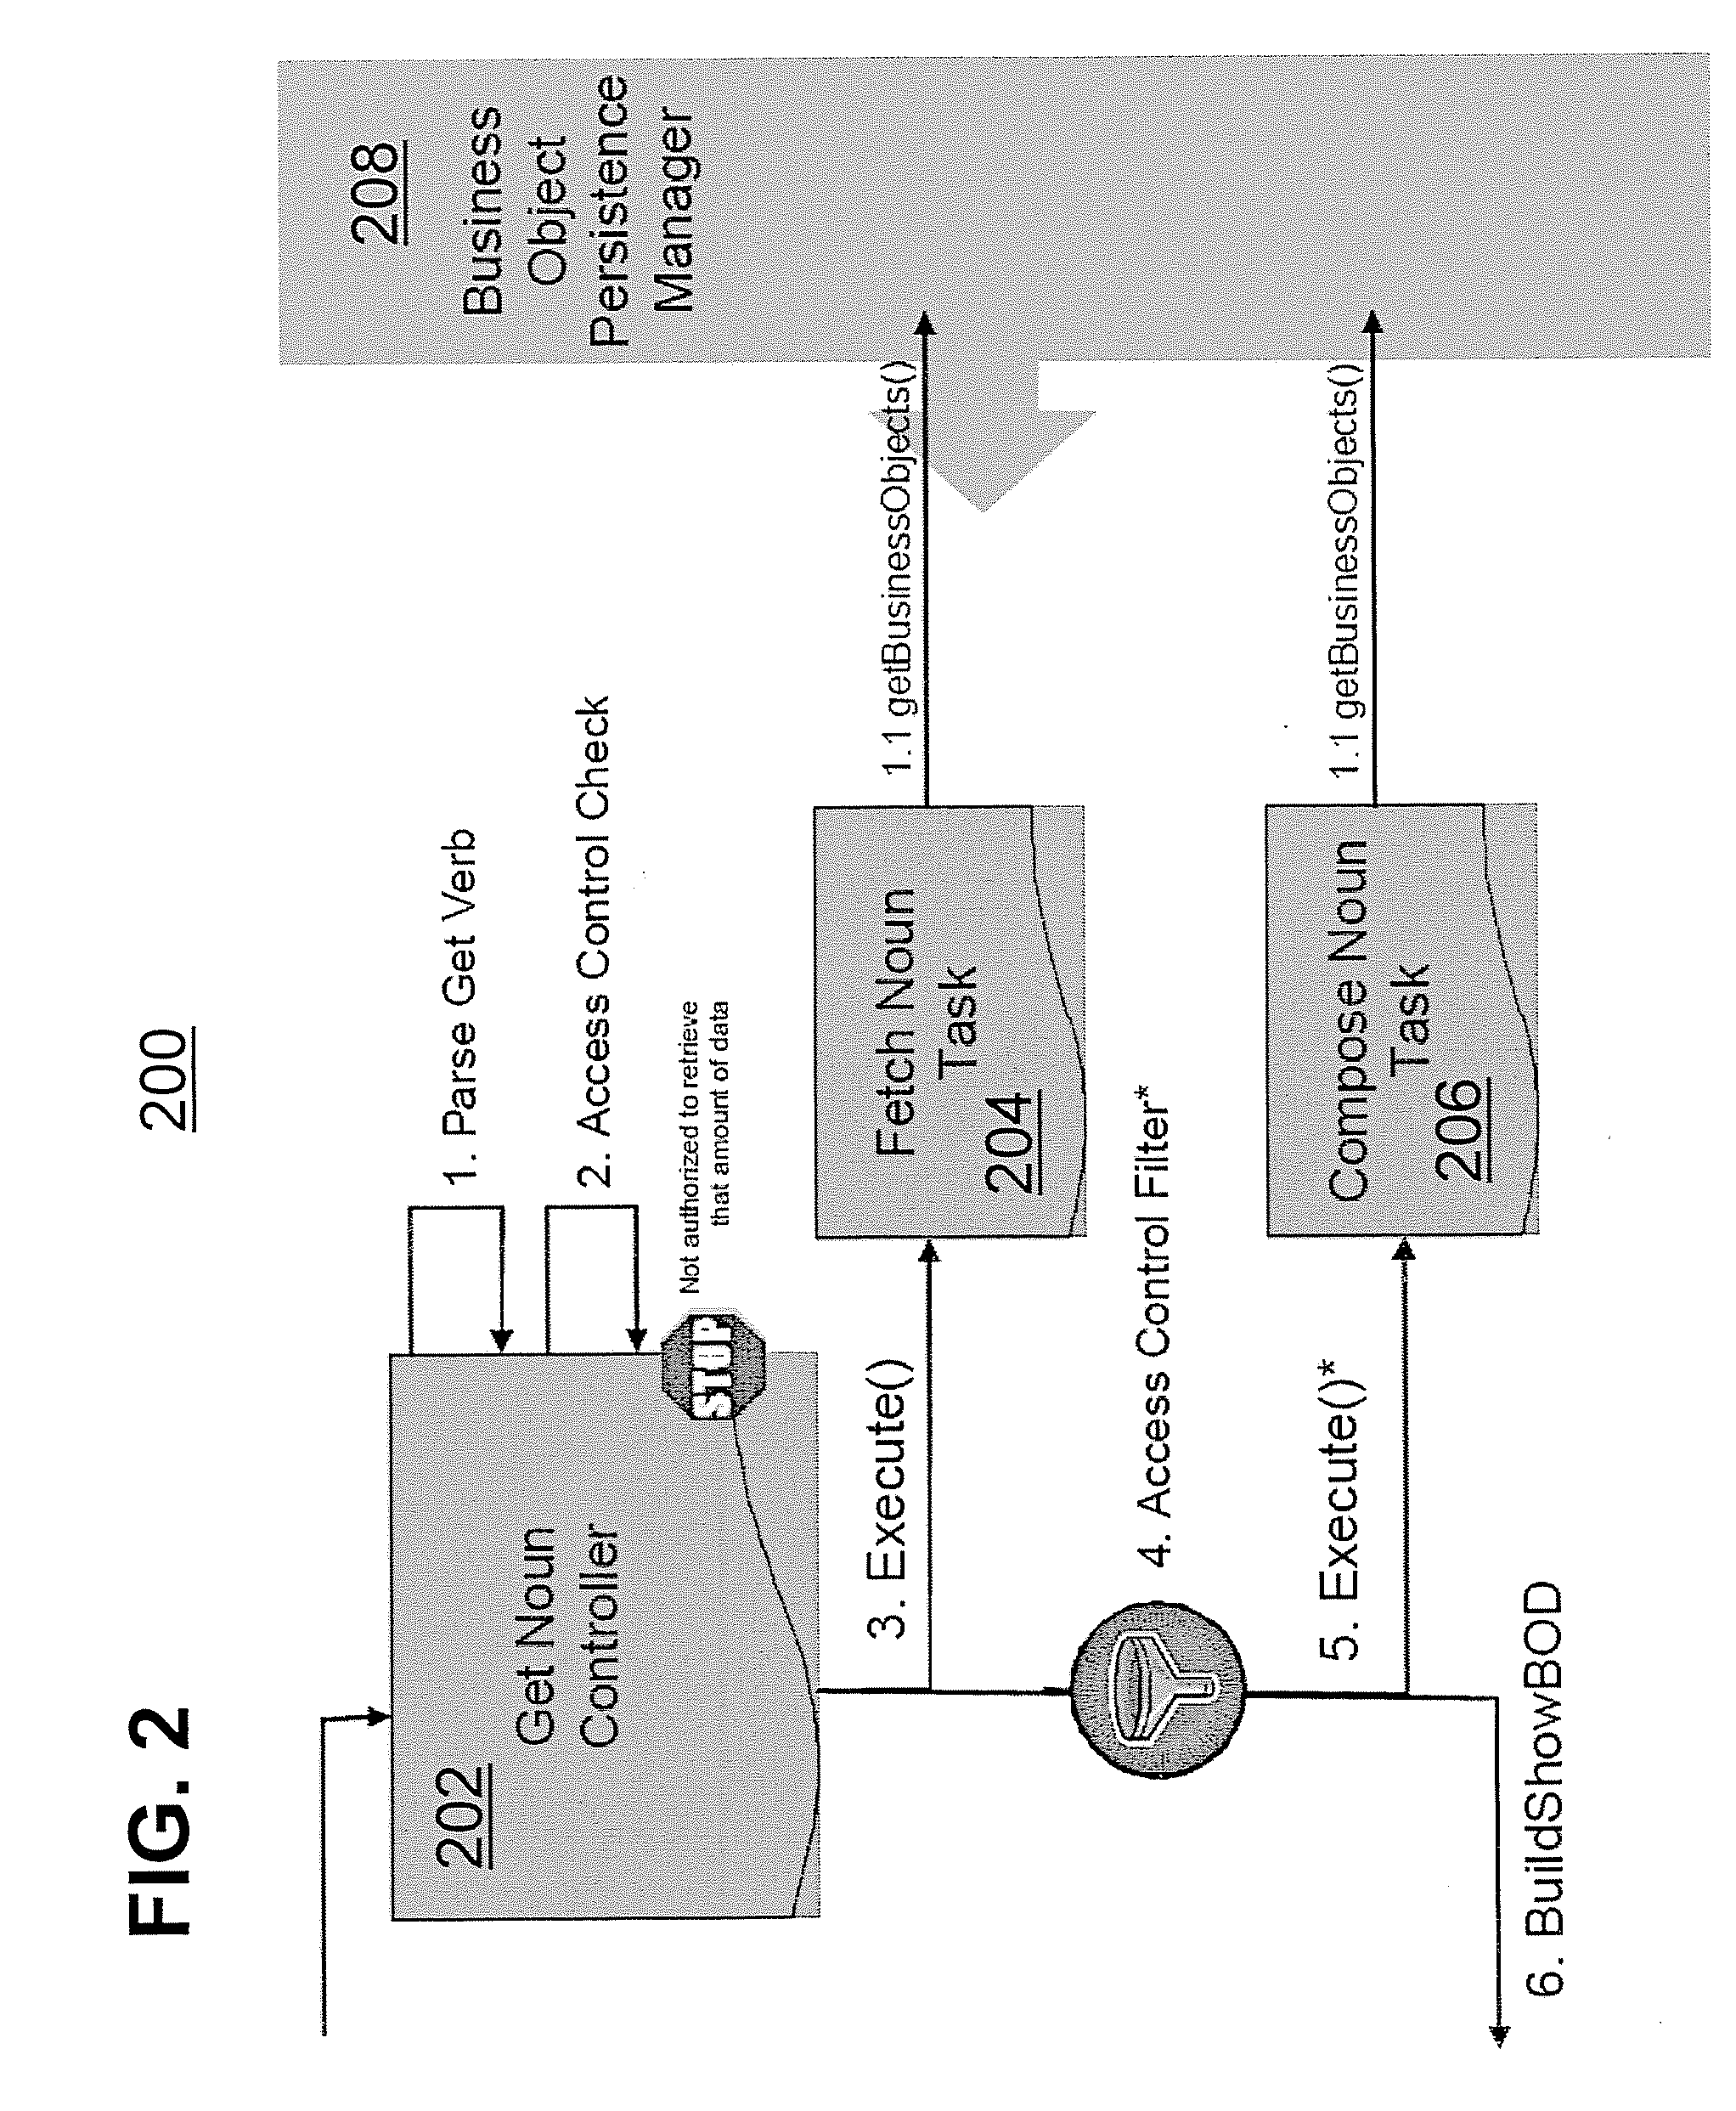 Service-oriented architecture component processing model